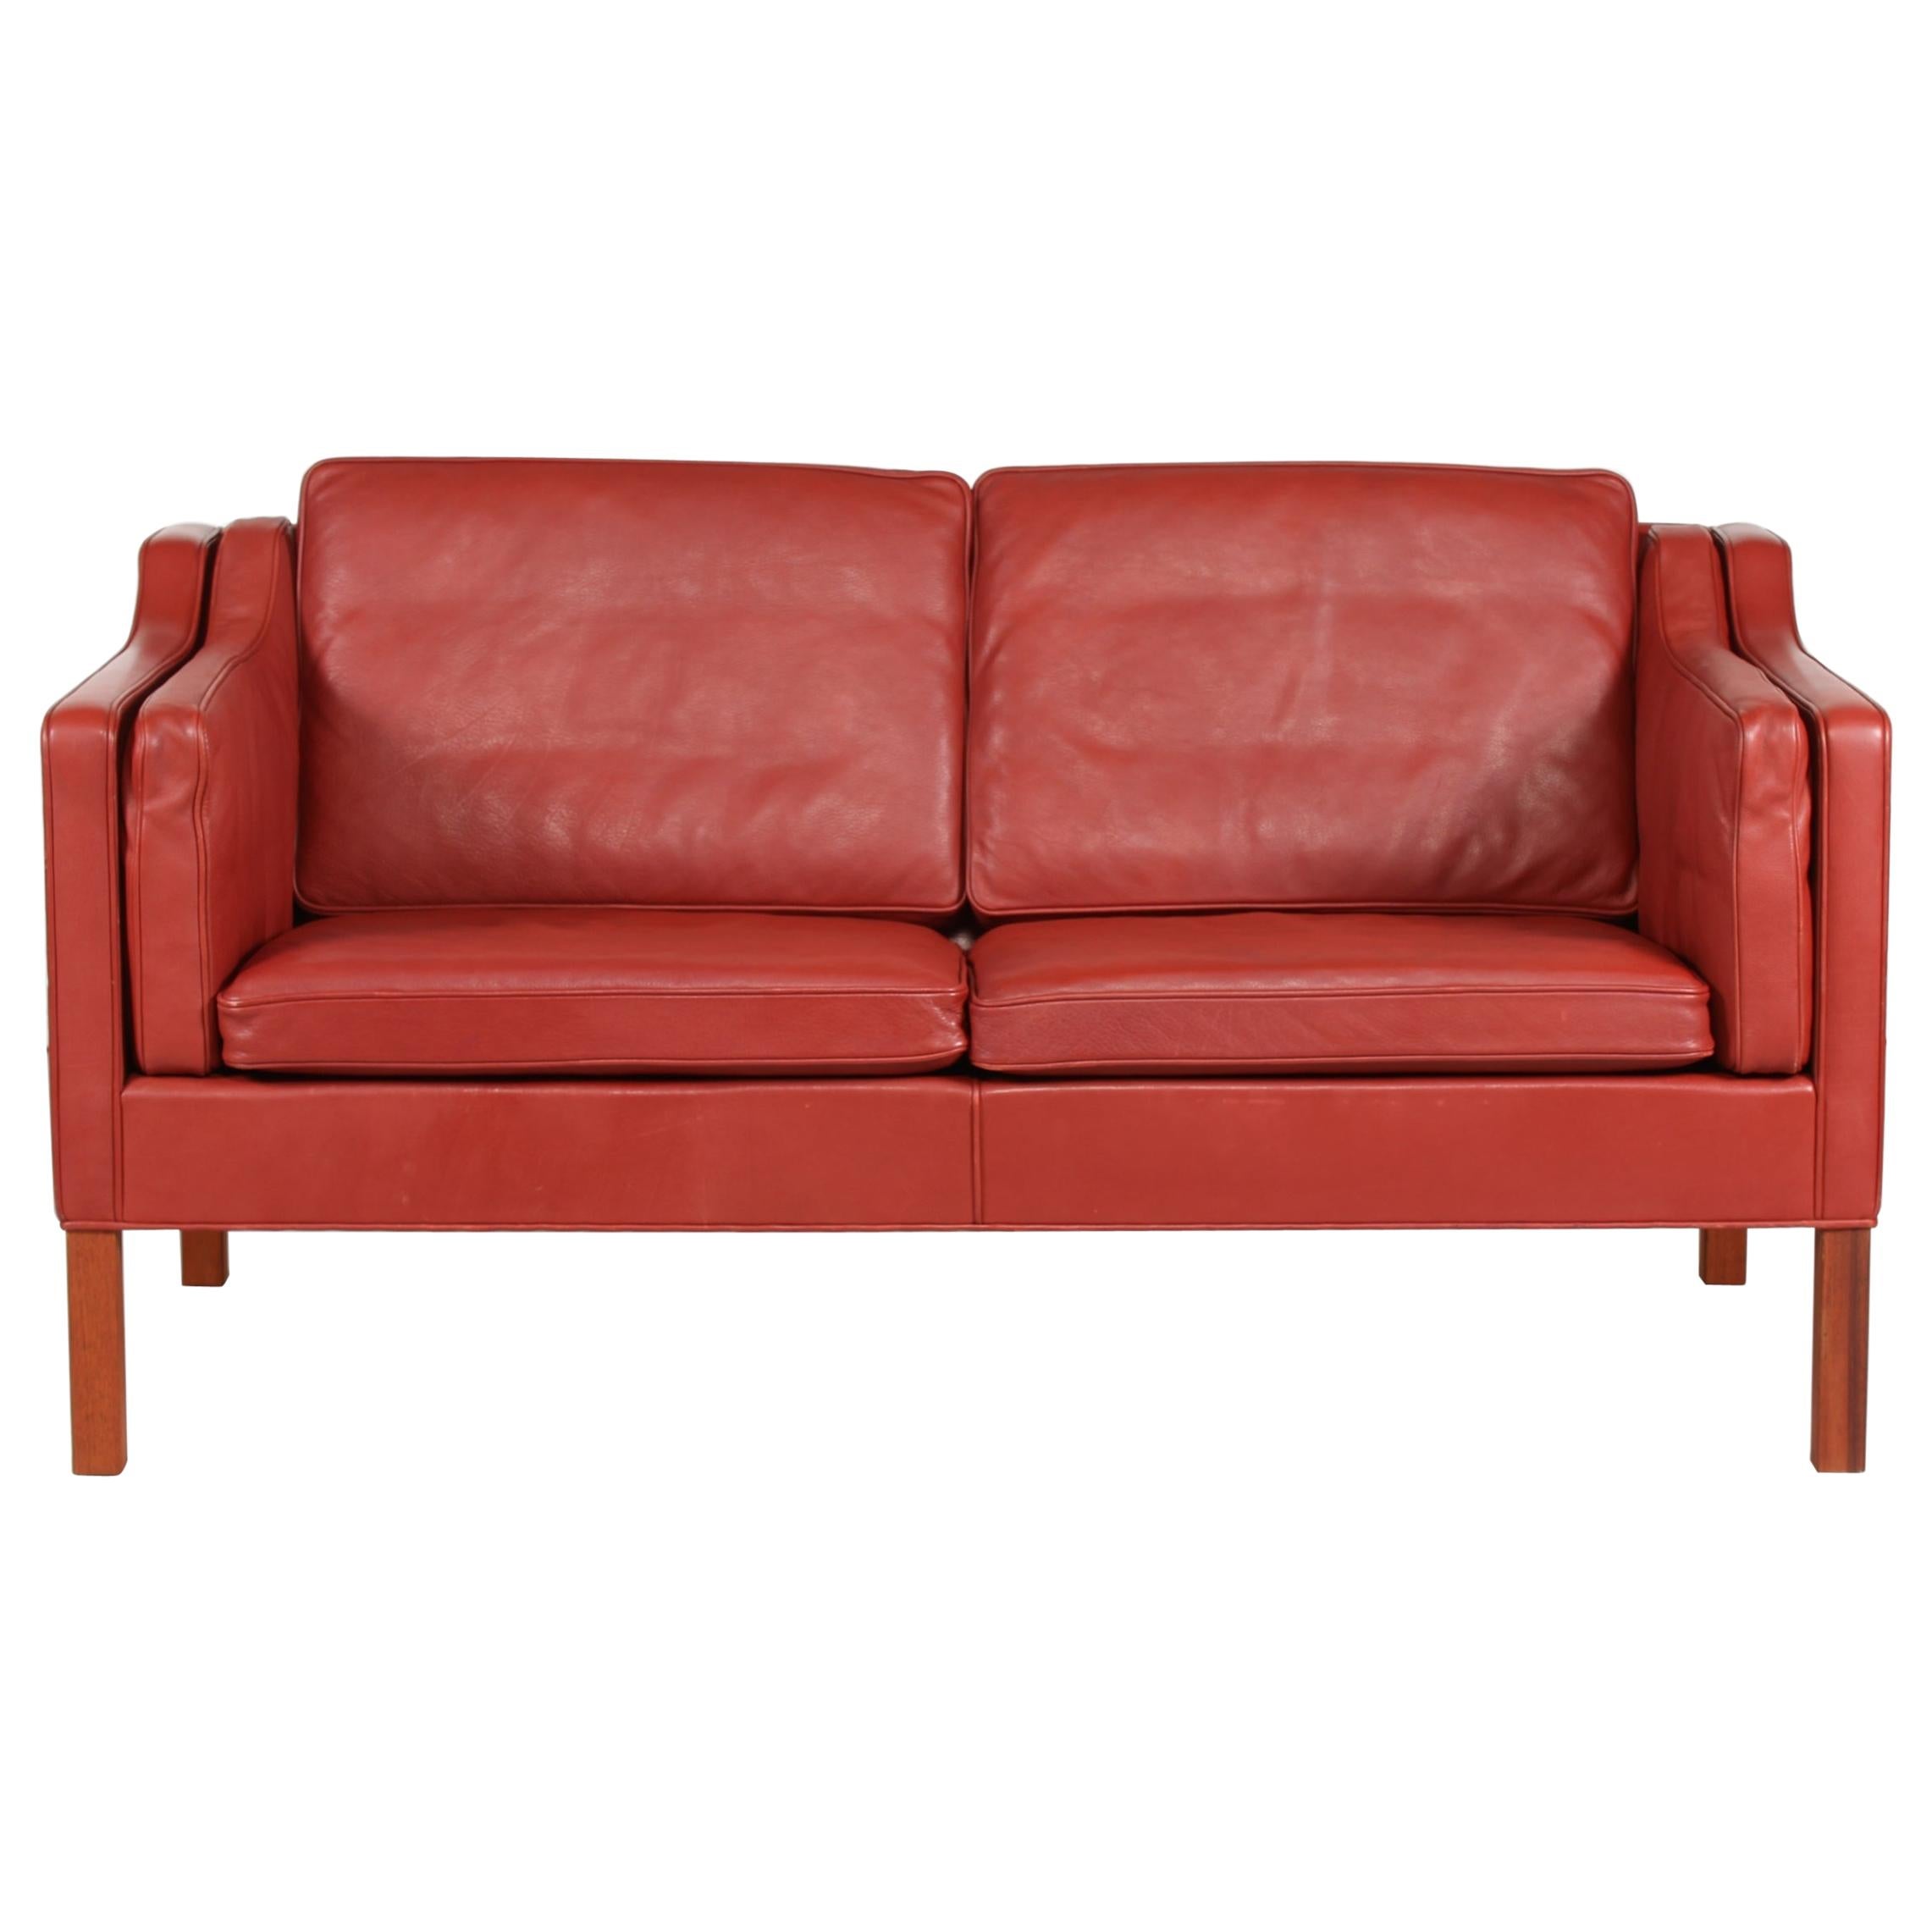 Børge Mogensen Sofa 2212 with Red Brown Leather by Fredericia Stolefabrik, 1982